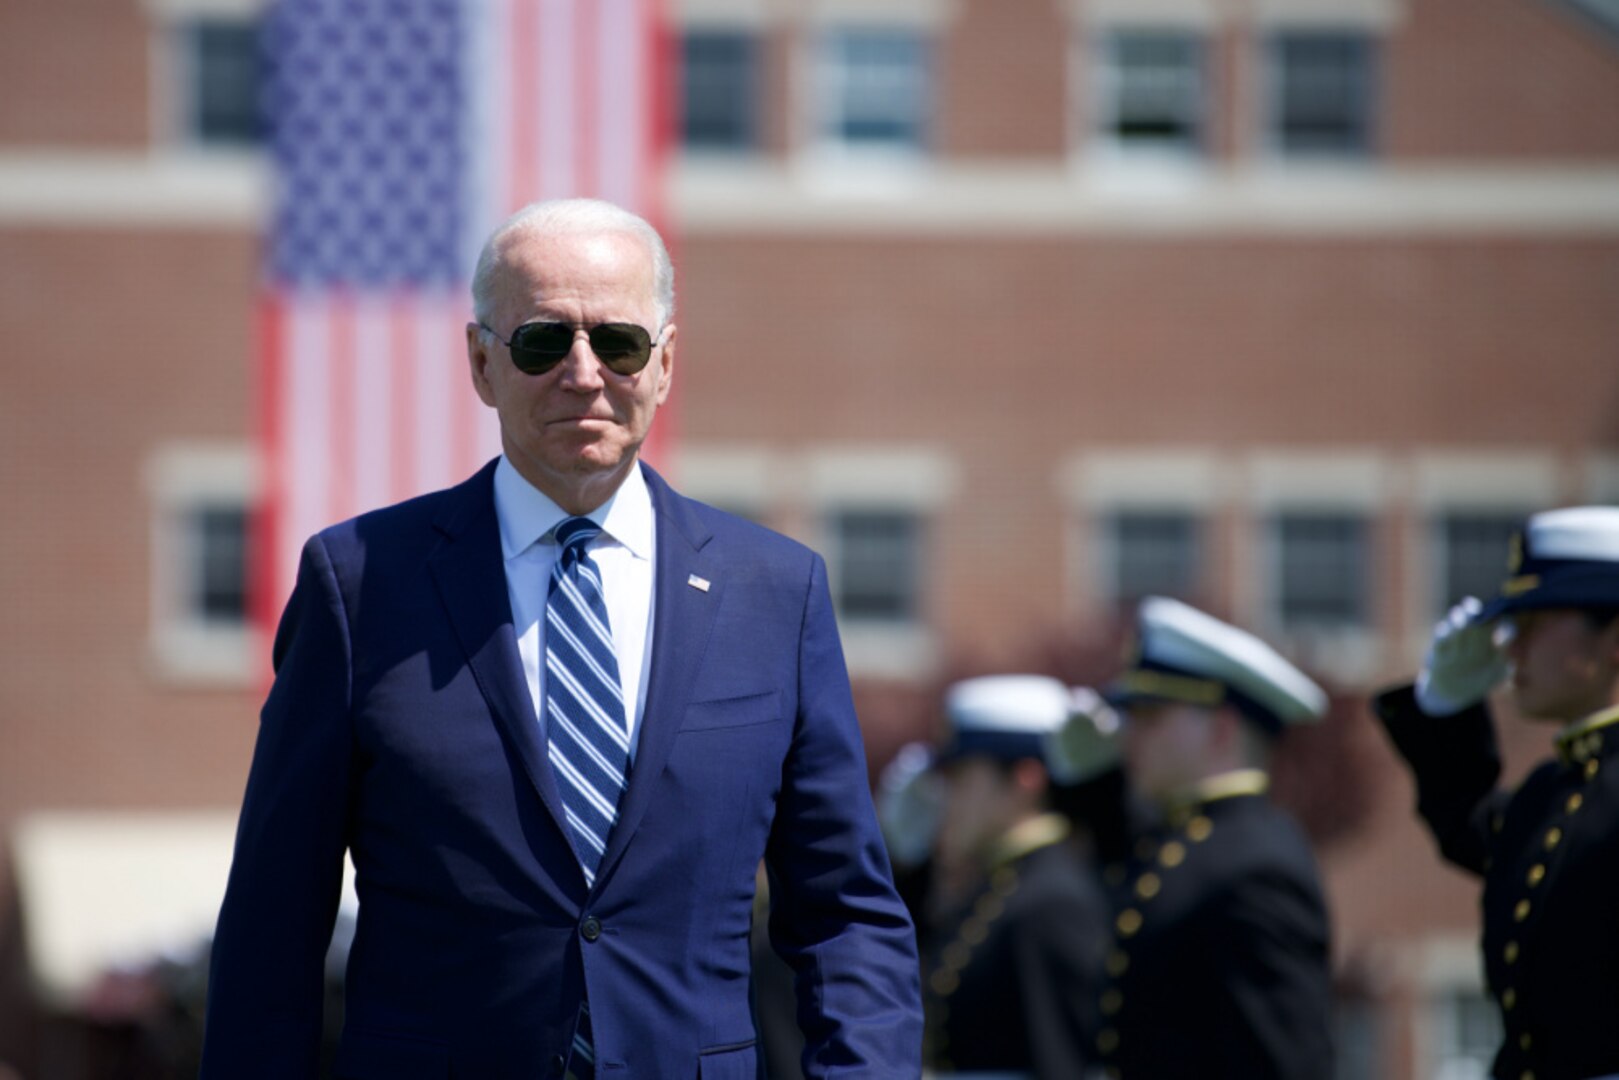 President Joseph R. Biden Jr. delivered the keynote address at the Coast Guard Academy during the 140th Commencement Exercises May 19, 2021.